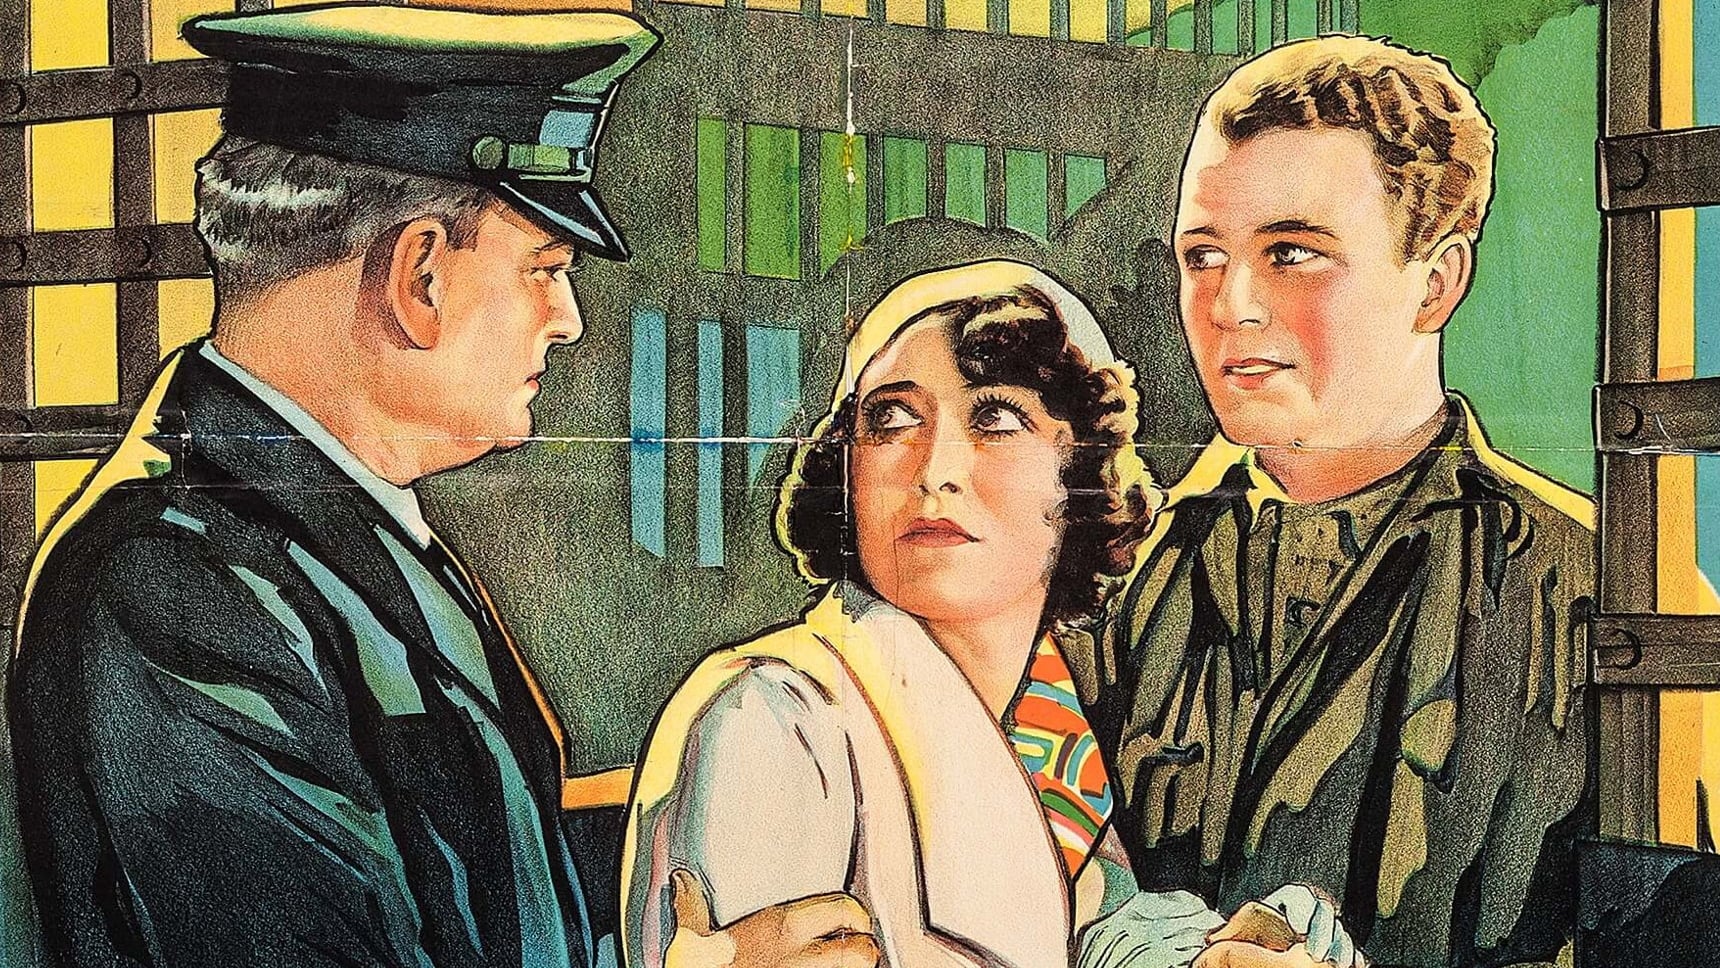 They Never Come Back (1932)